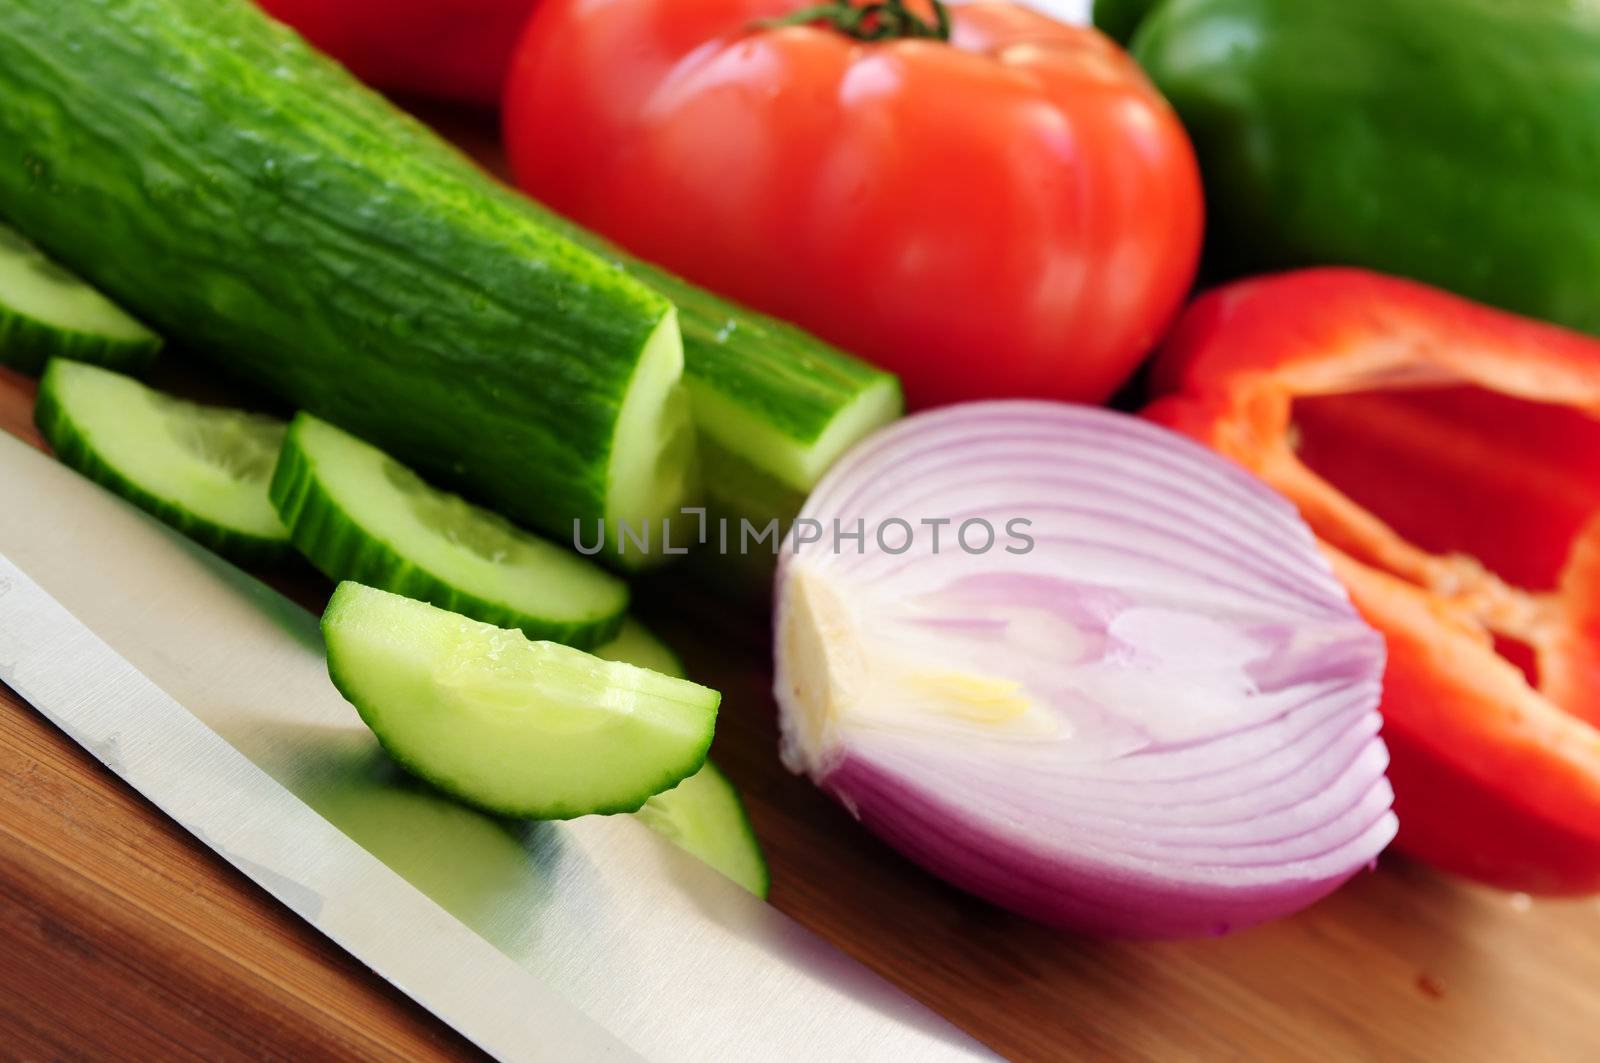 Fresh garden vegetables on cutting board - ingredients for a salad